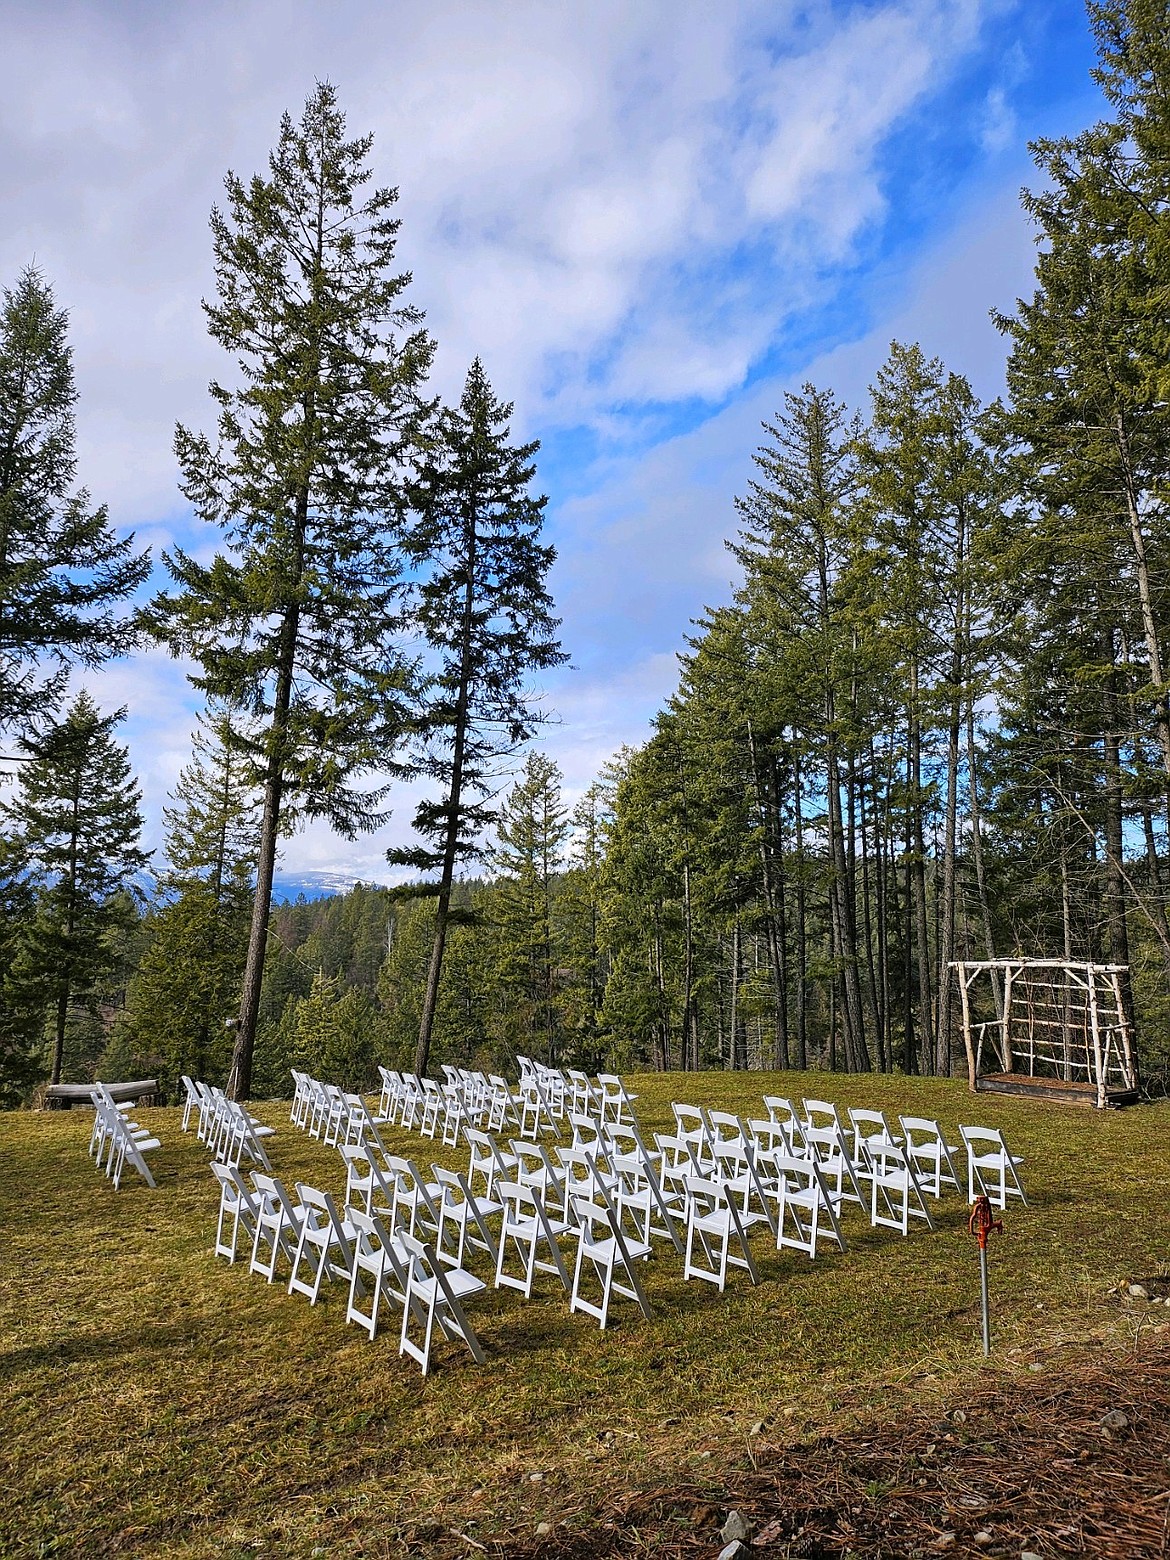 Chairs set out on the lawn at Pioneer Lodge for a wedding ceremony.